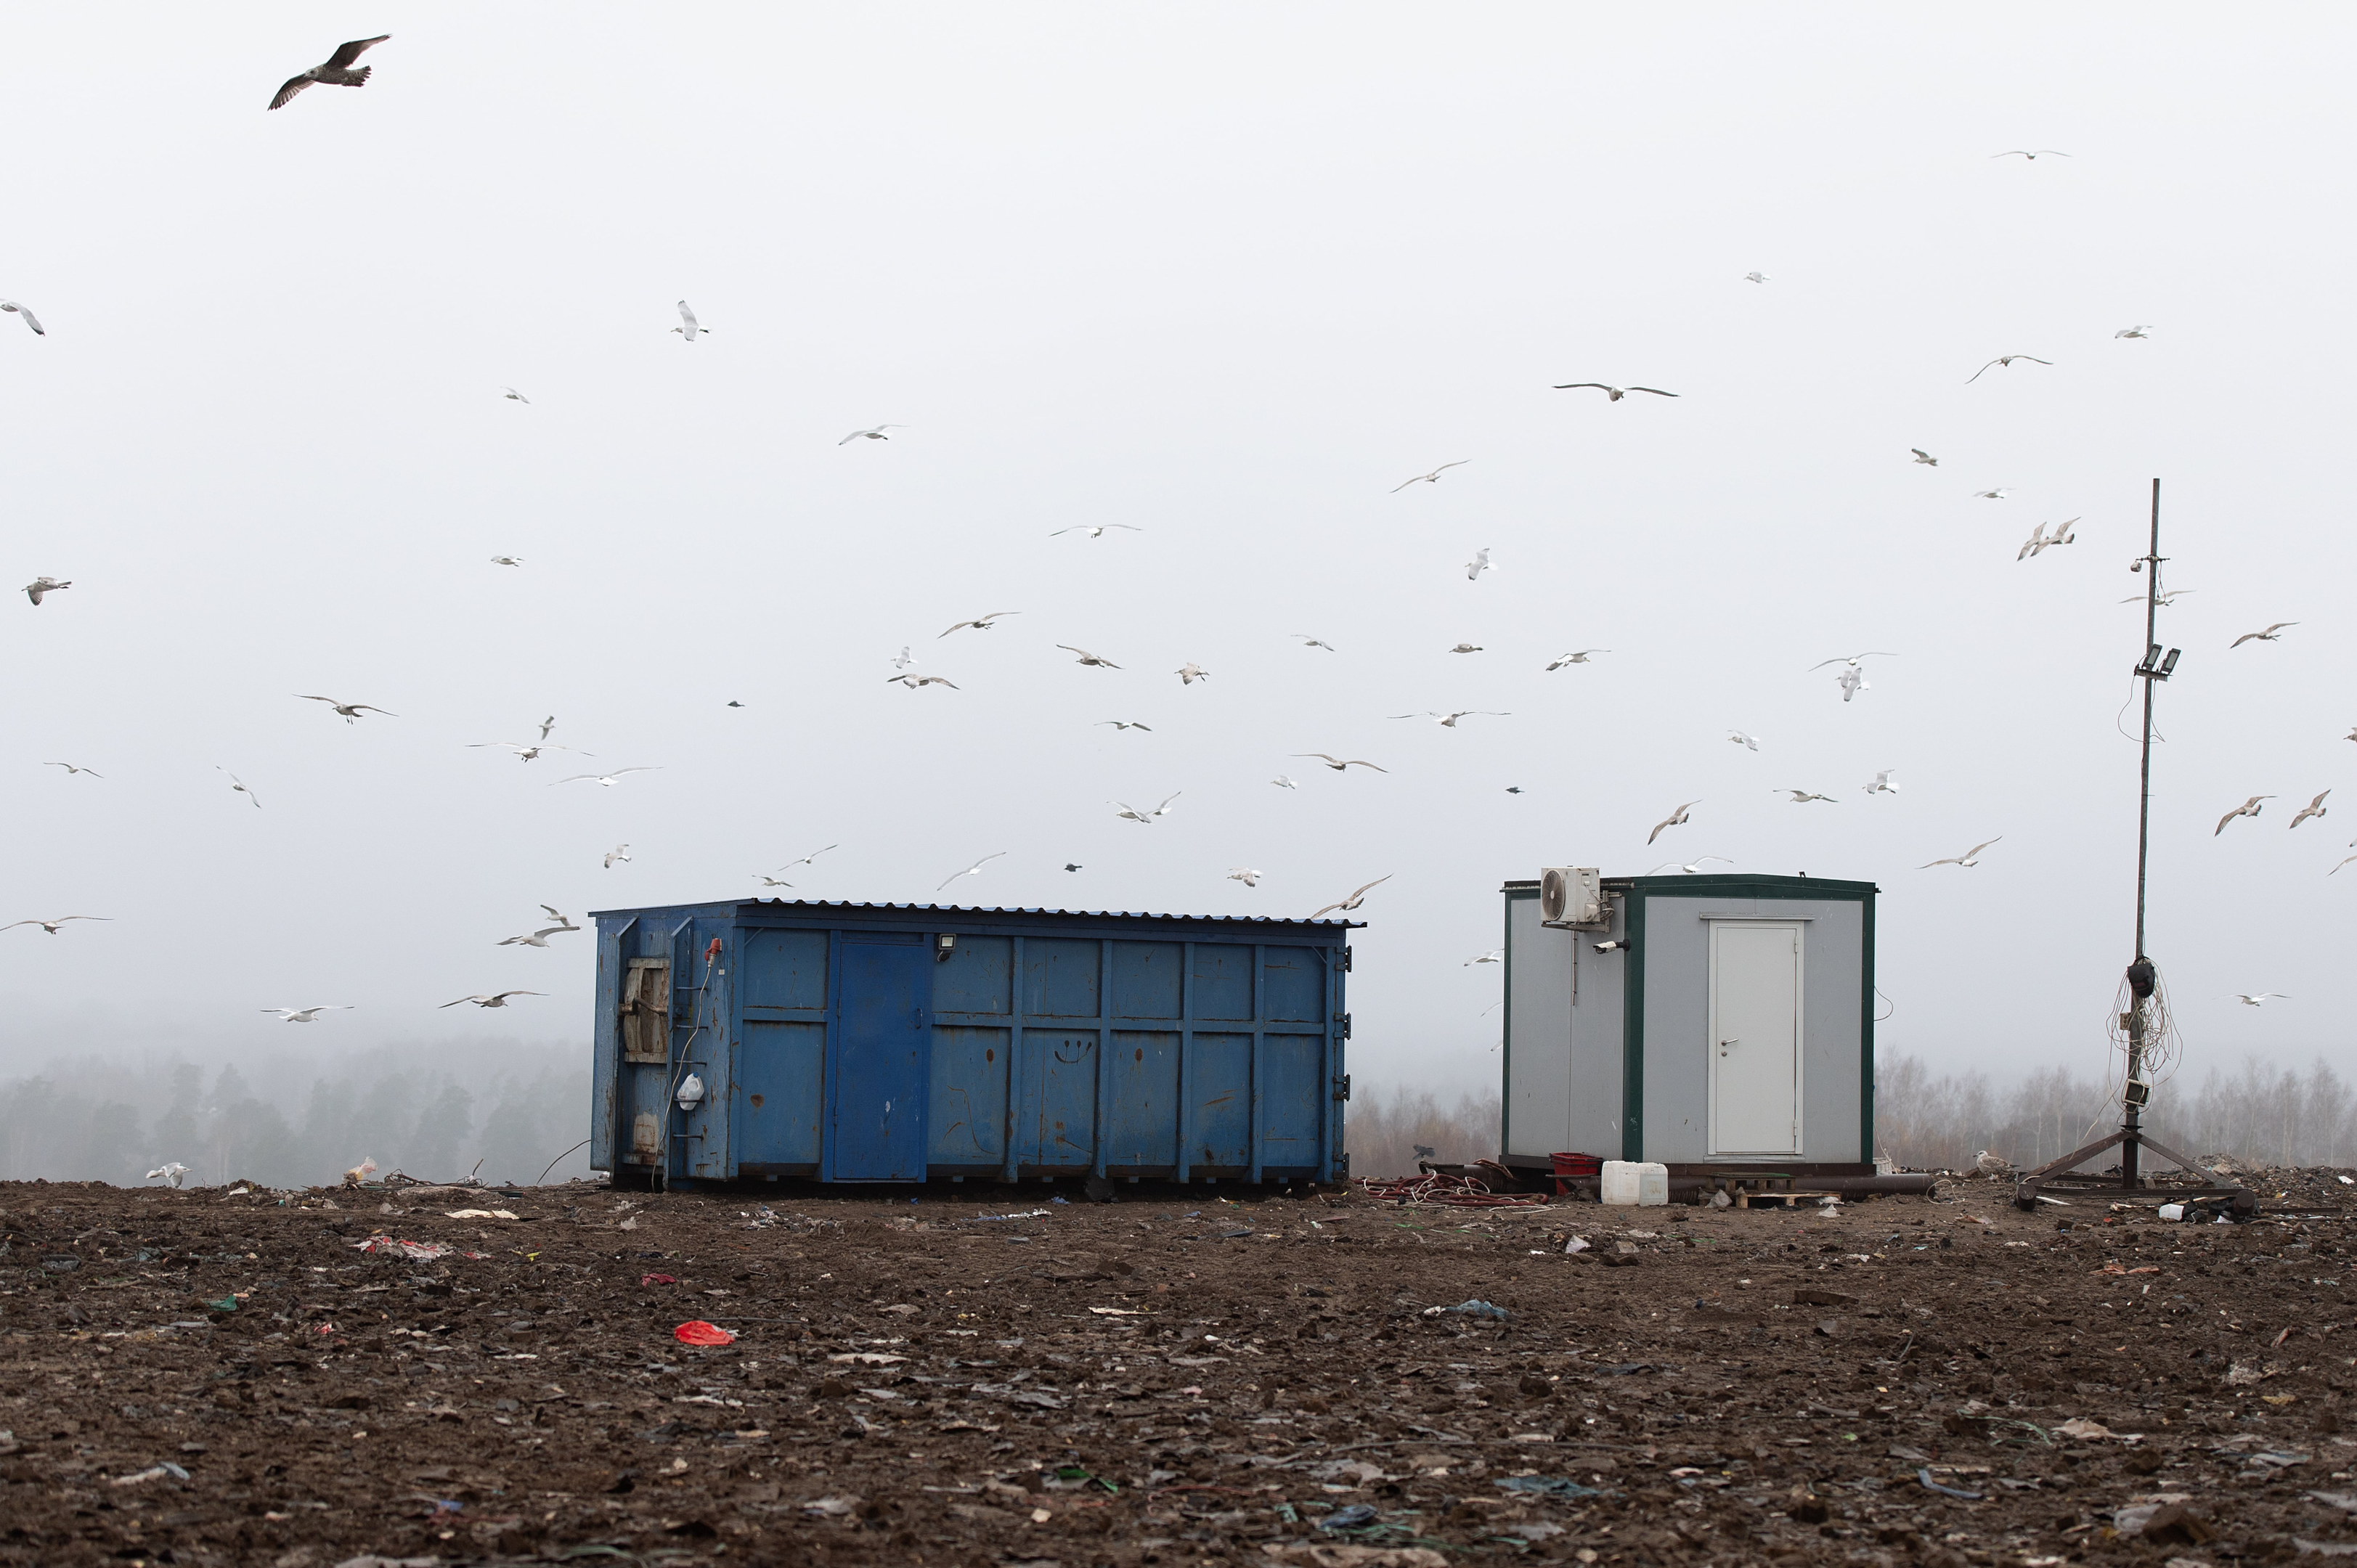 Birds flying over a landfill site